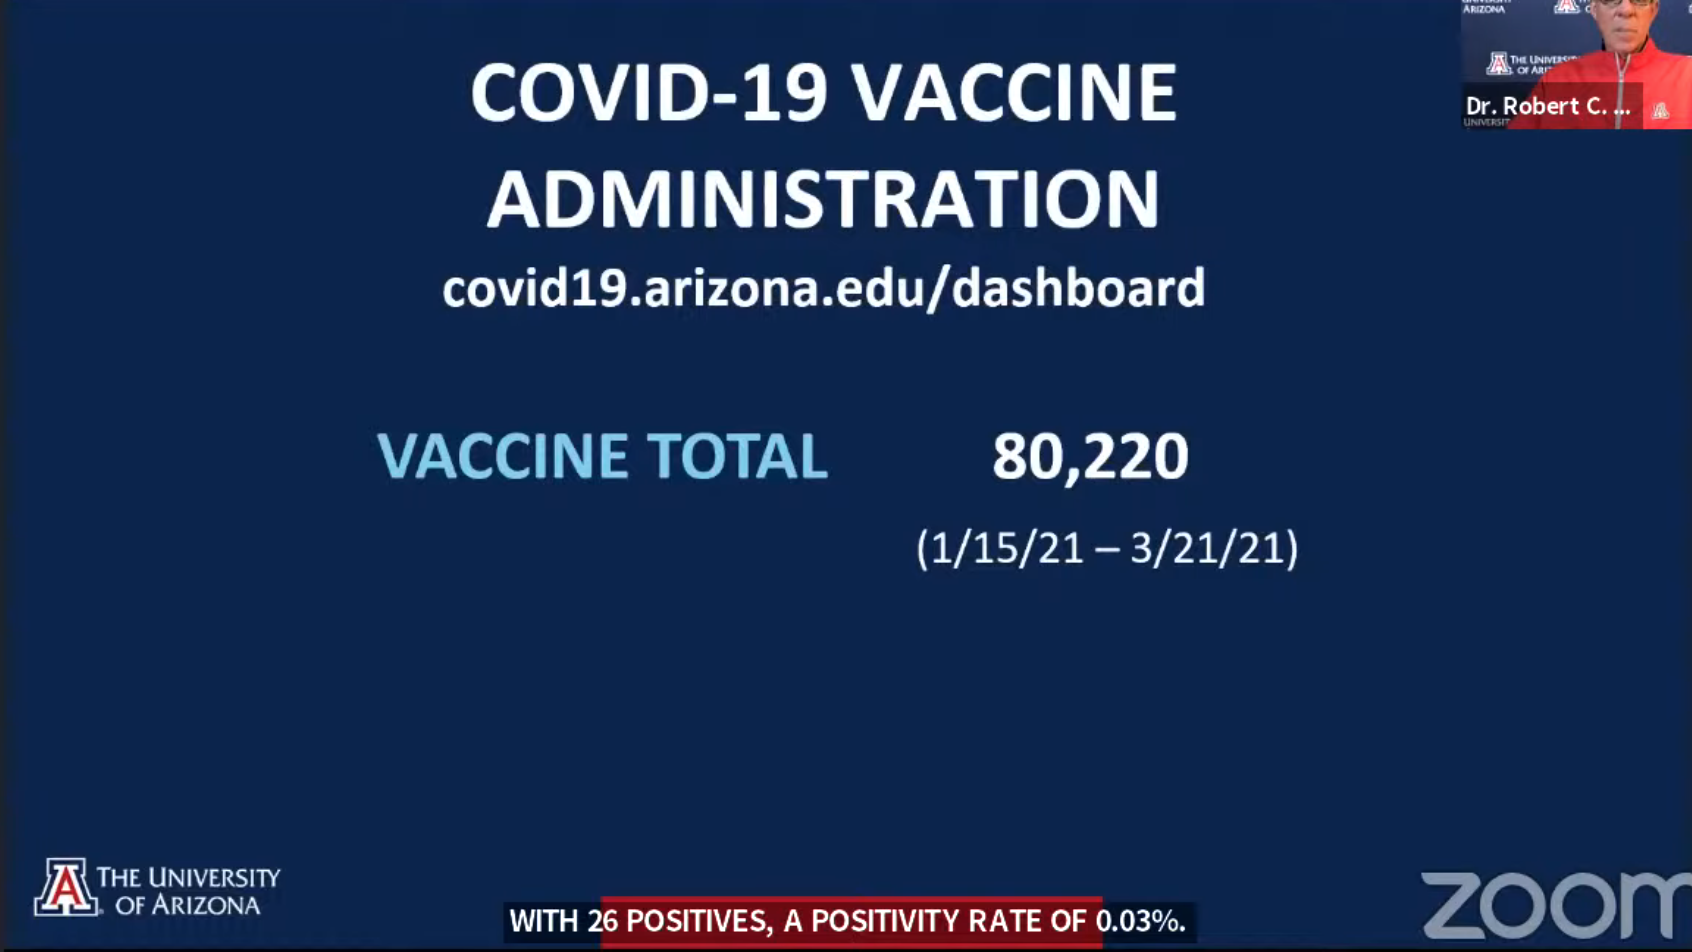 Screenshot of the University of Arizona's recent COVID-19 vaccine data, reflecting that the university administered over 80,000 vaccines at the time of the press conference.